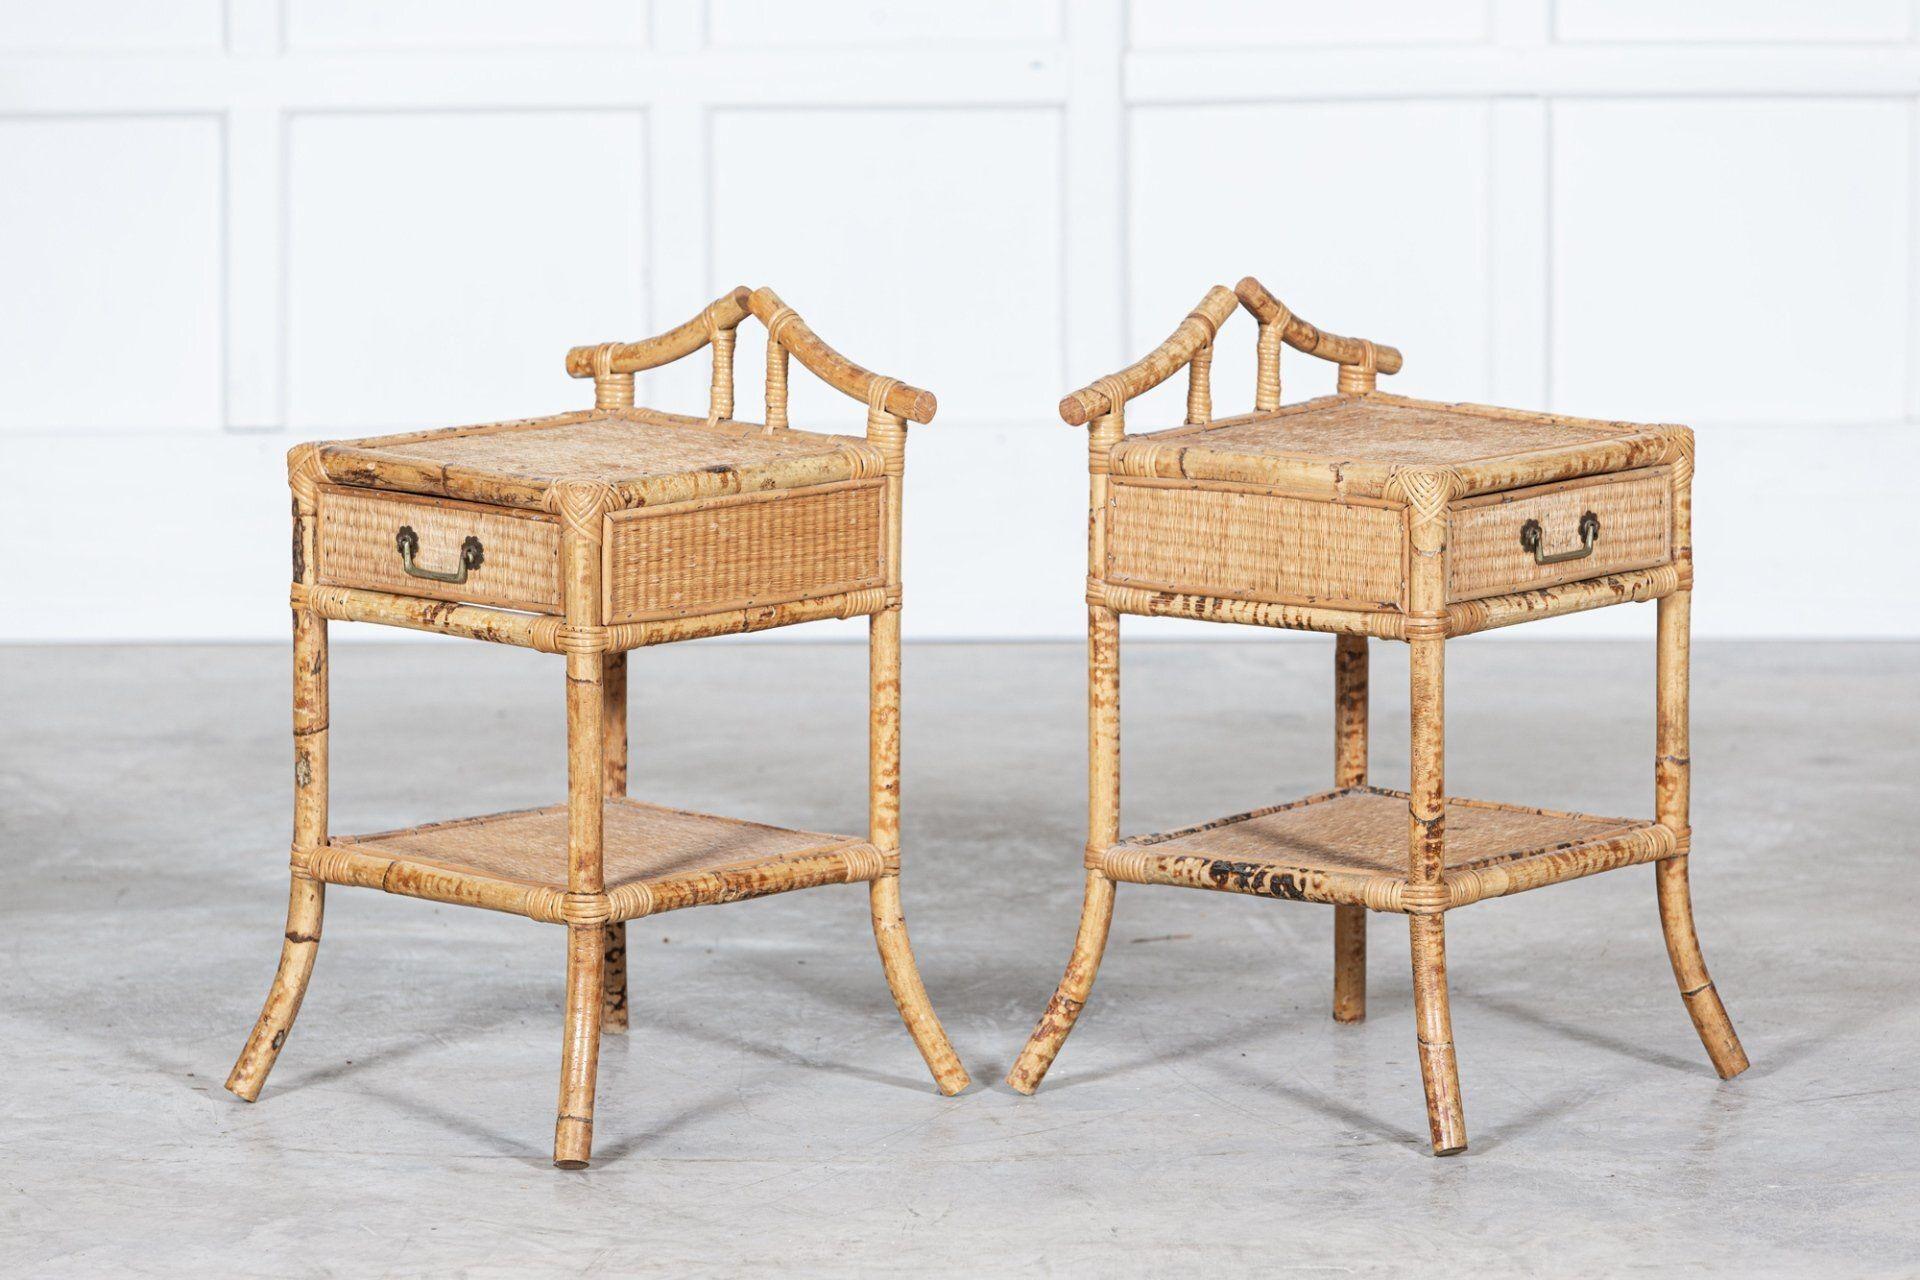 circa 1950
Pair English Mid Century bamboo bedside tables
Measures: W 39 x D 35 x H 60cm.
   